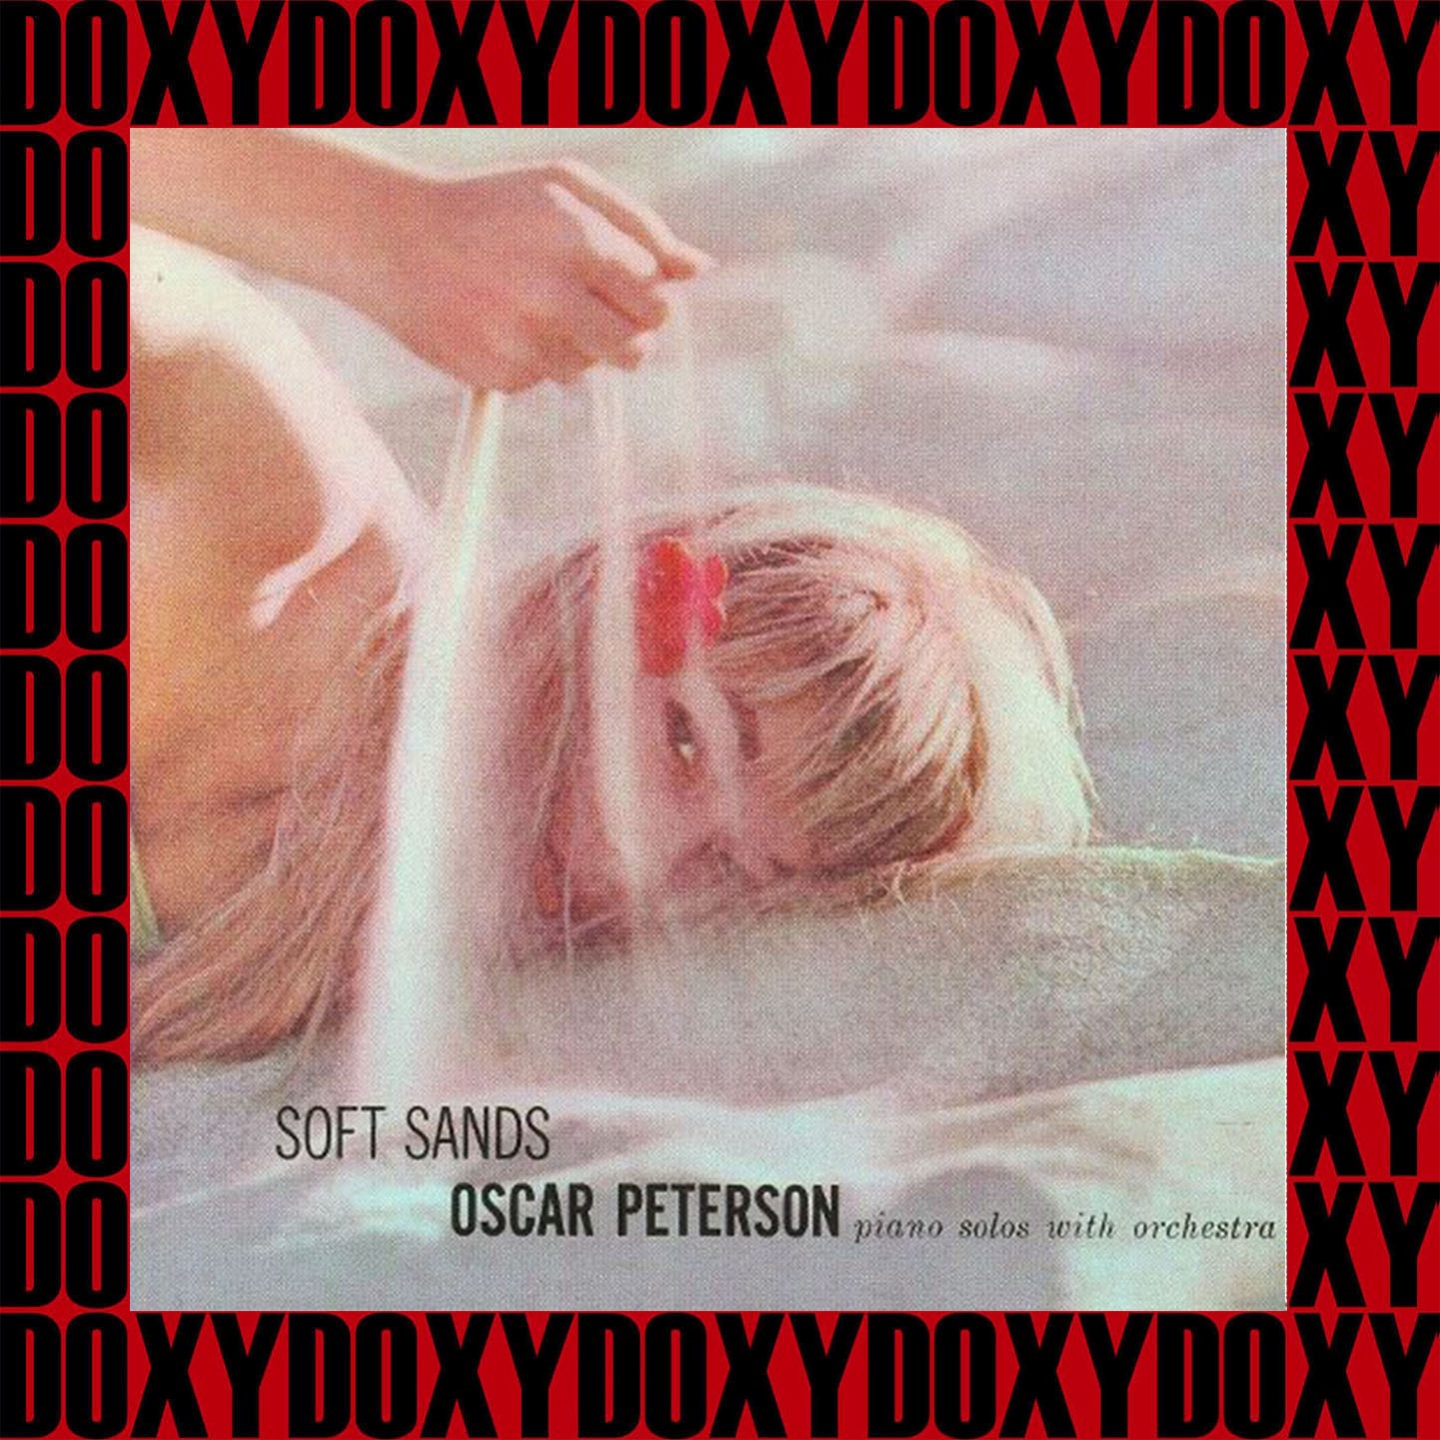 Soft Sands (Remastered Version) (Doxy Collection)